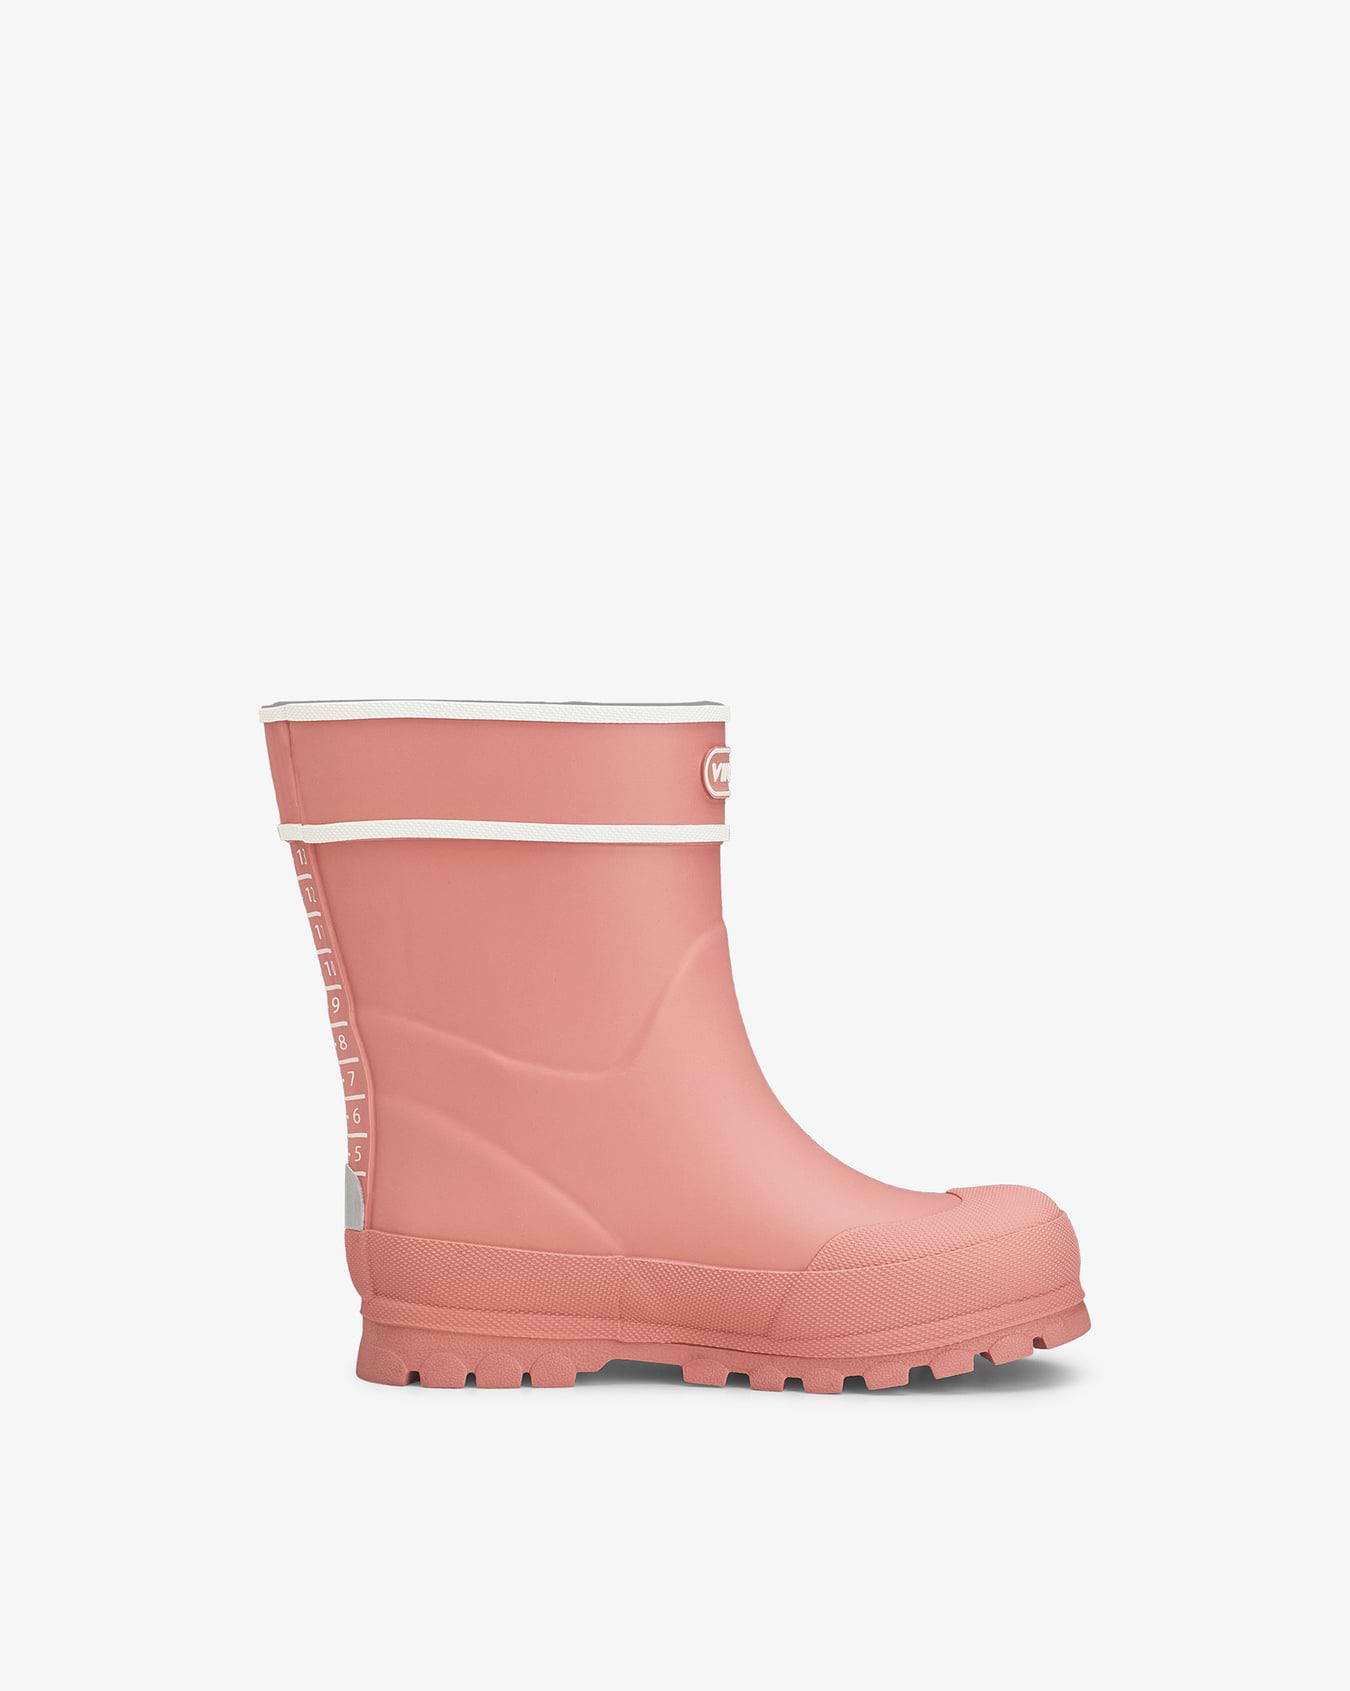 Viking Alv Jolly Kids Rubber Boots Pink